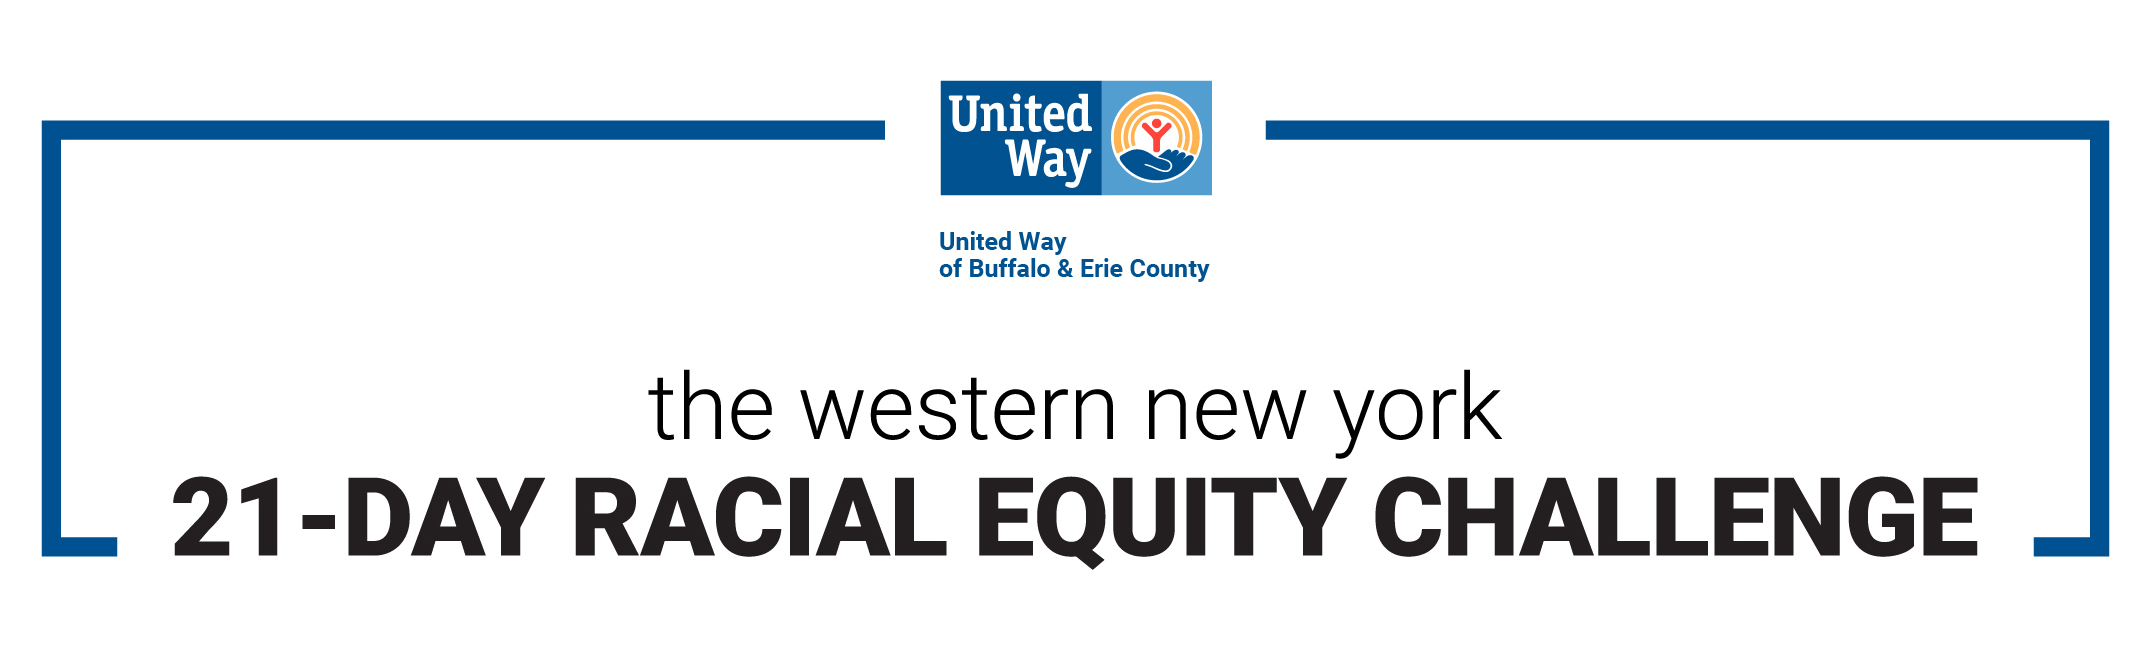 the western New York 21-Day Equity Challenge